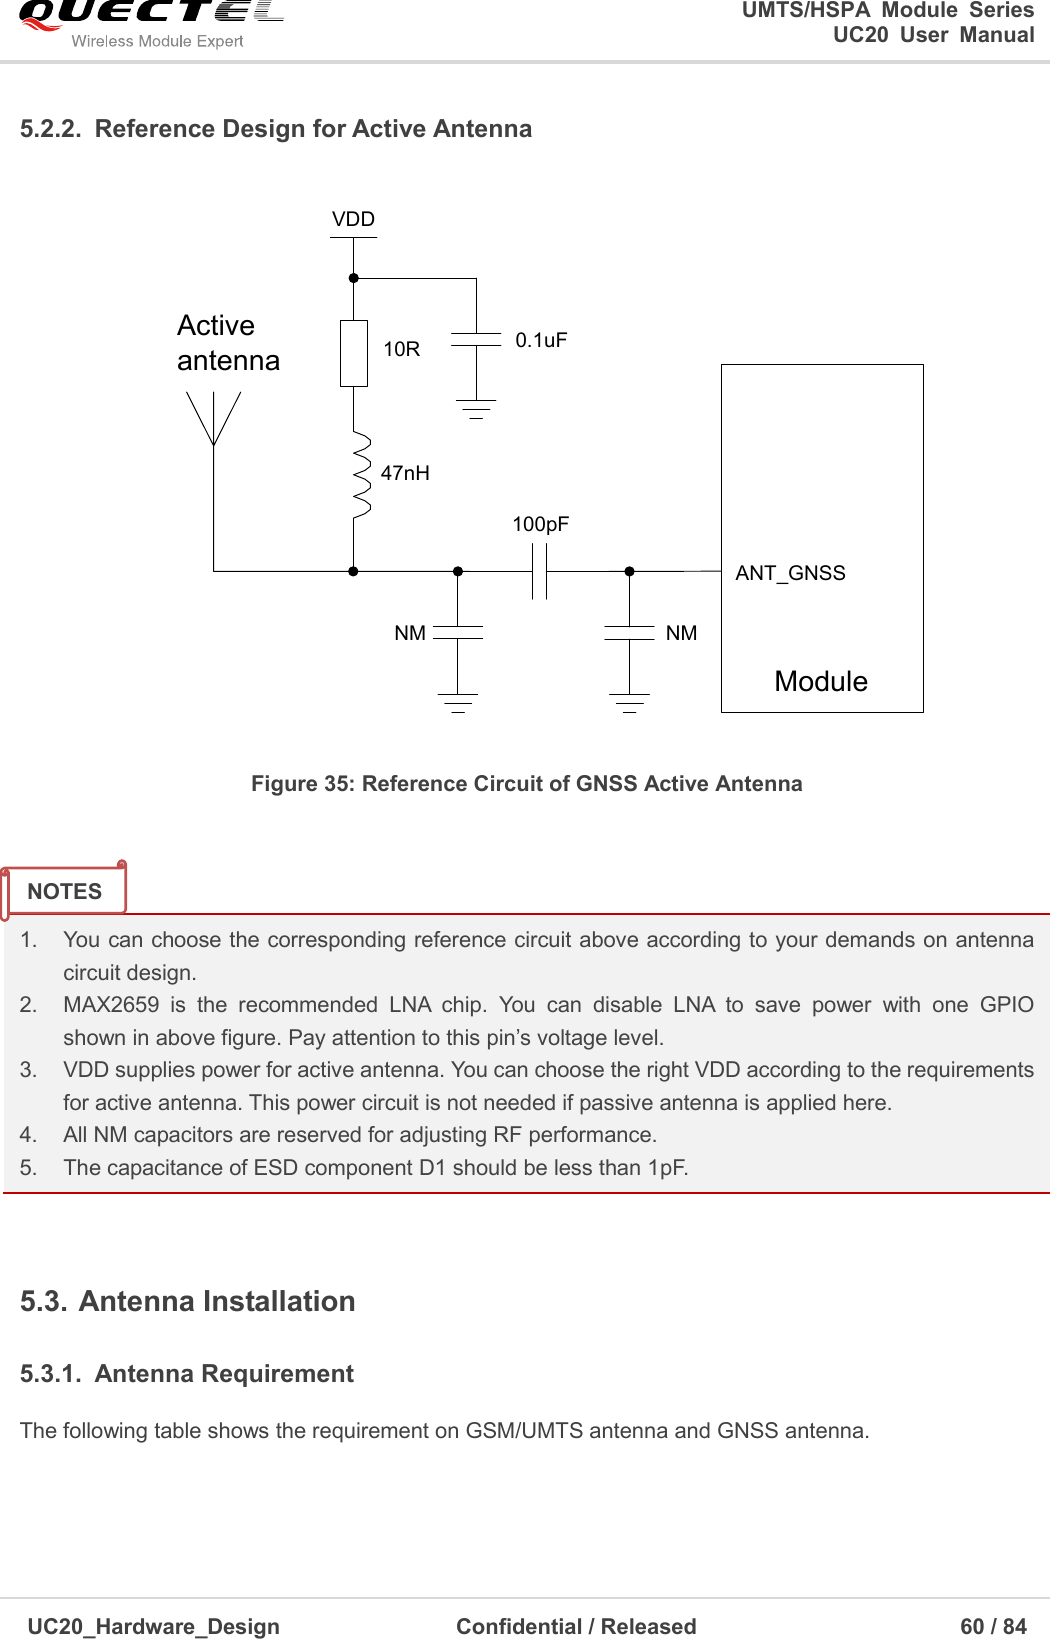                                                                                                                                               UMTS/HSPA  Module  Series                                                                 UC20  User  Manual  UC20_Hardware_Design                  Confidential / Released                            60 / 84     5.2.2.  Reference Design for Active Antenna ActiveantennaVDDModuleANT_GNSS47nH10R 0.1uF100pFNMNM Figure 35: Reference Circuit of GNSS Active Antenna   1.    You can choose the corresponding reference circuit above according to your demands on antenna   circuit design. 2.    MAX2659  is  the  recommended  LNA  chip.  You  can  disable  LNA  to  save  power  with  one  GPIO  shown in above figure. Pay attention to this pin’s voltage level. 3.    VDD supplies power for active antenna. You can choose the right VDD according to the requirements for active antenna. This power circuit is not needed if passive antenna is applied here. 4.    All NM capacitors are reserved for adjusting RF performance. 5.    The capacitance of ESD component D1 should be less than 1pF.  5.3. Antenna Installation 5.3.1.  Antenna Requirement The following table shows the requirement on GSM/UMTS antenna and GNSS antenna.  NOTES 